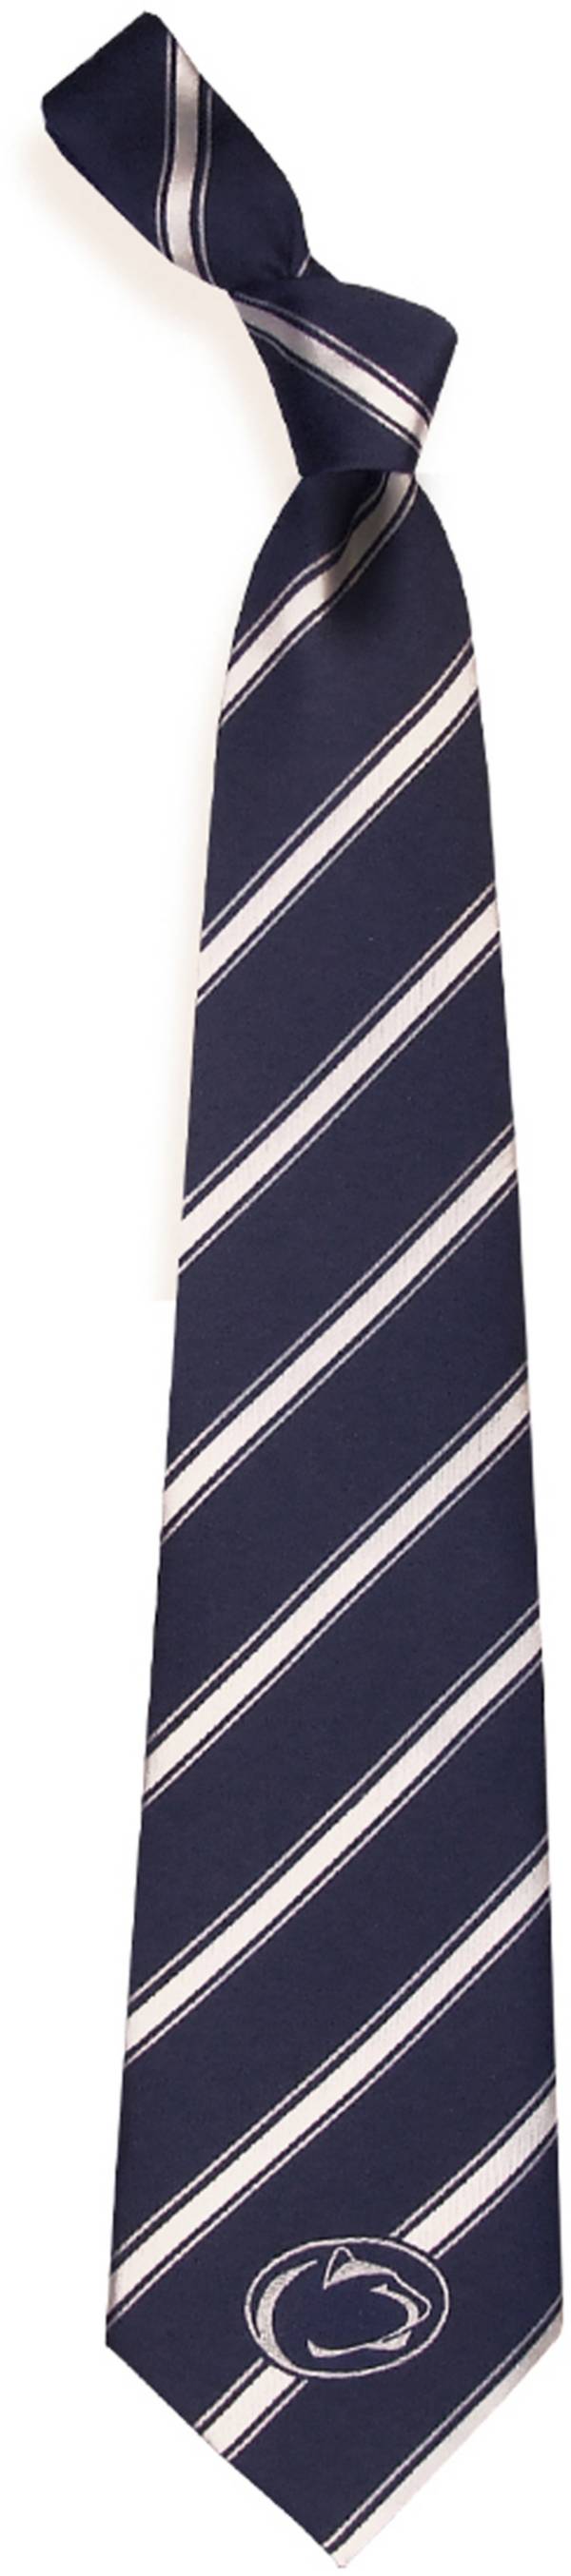 Eagles Wings Penn State Nittany Lions Woven Poly 1 Necktie product image